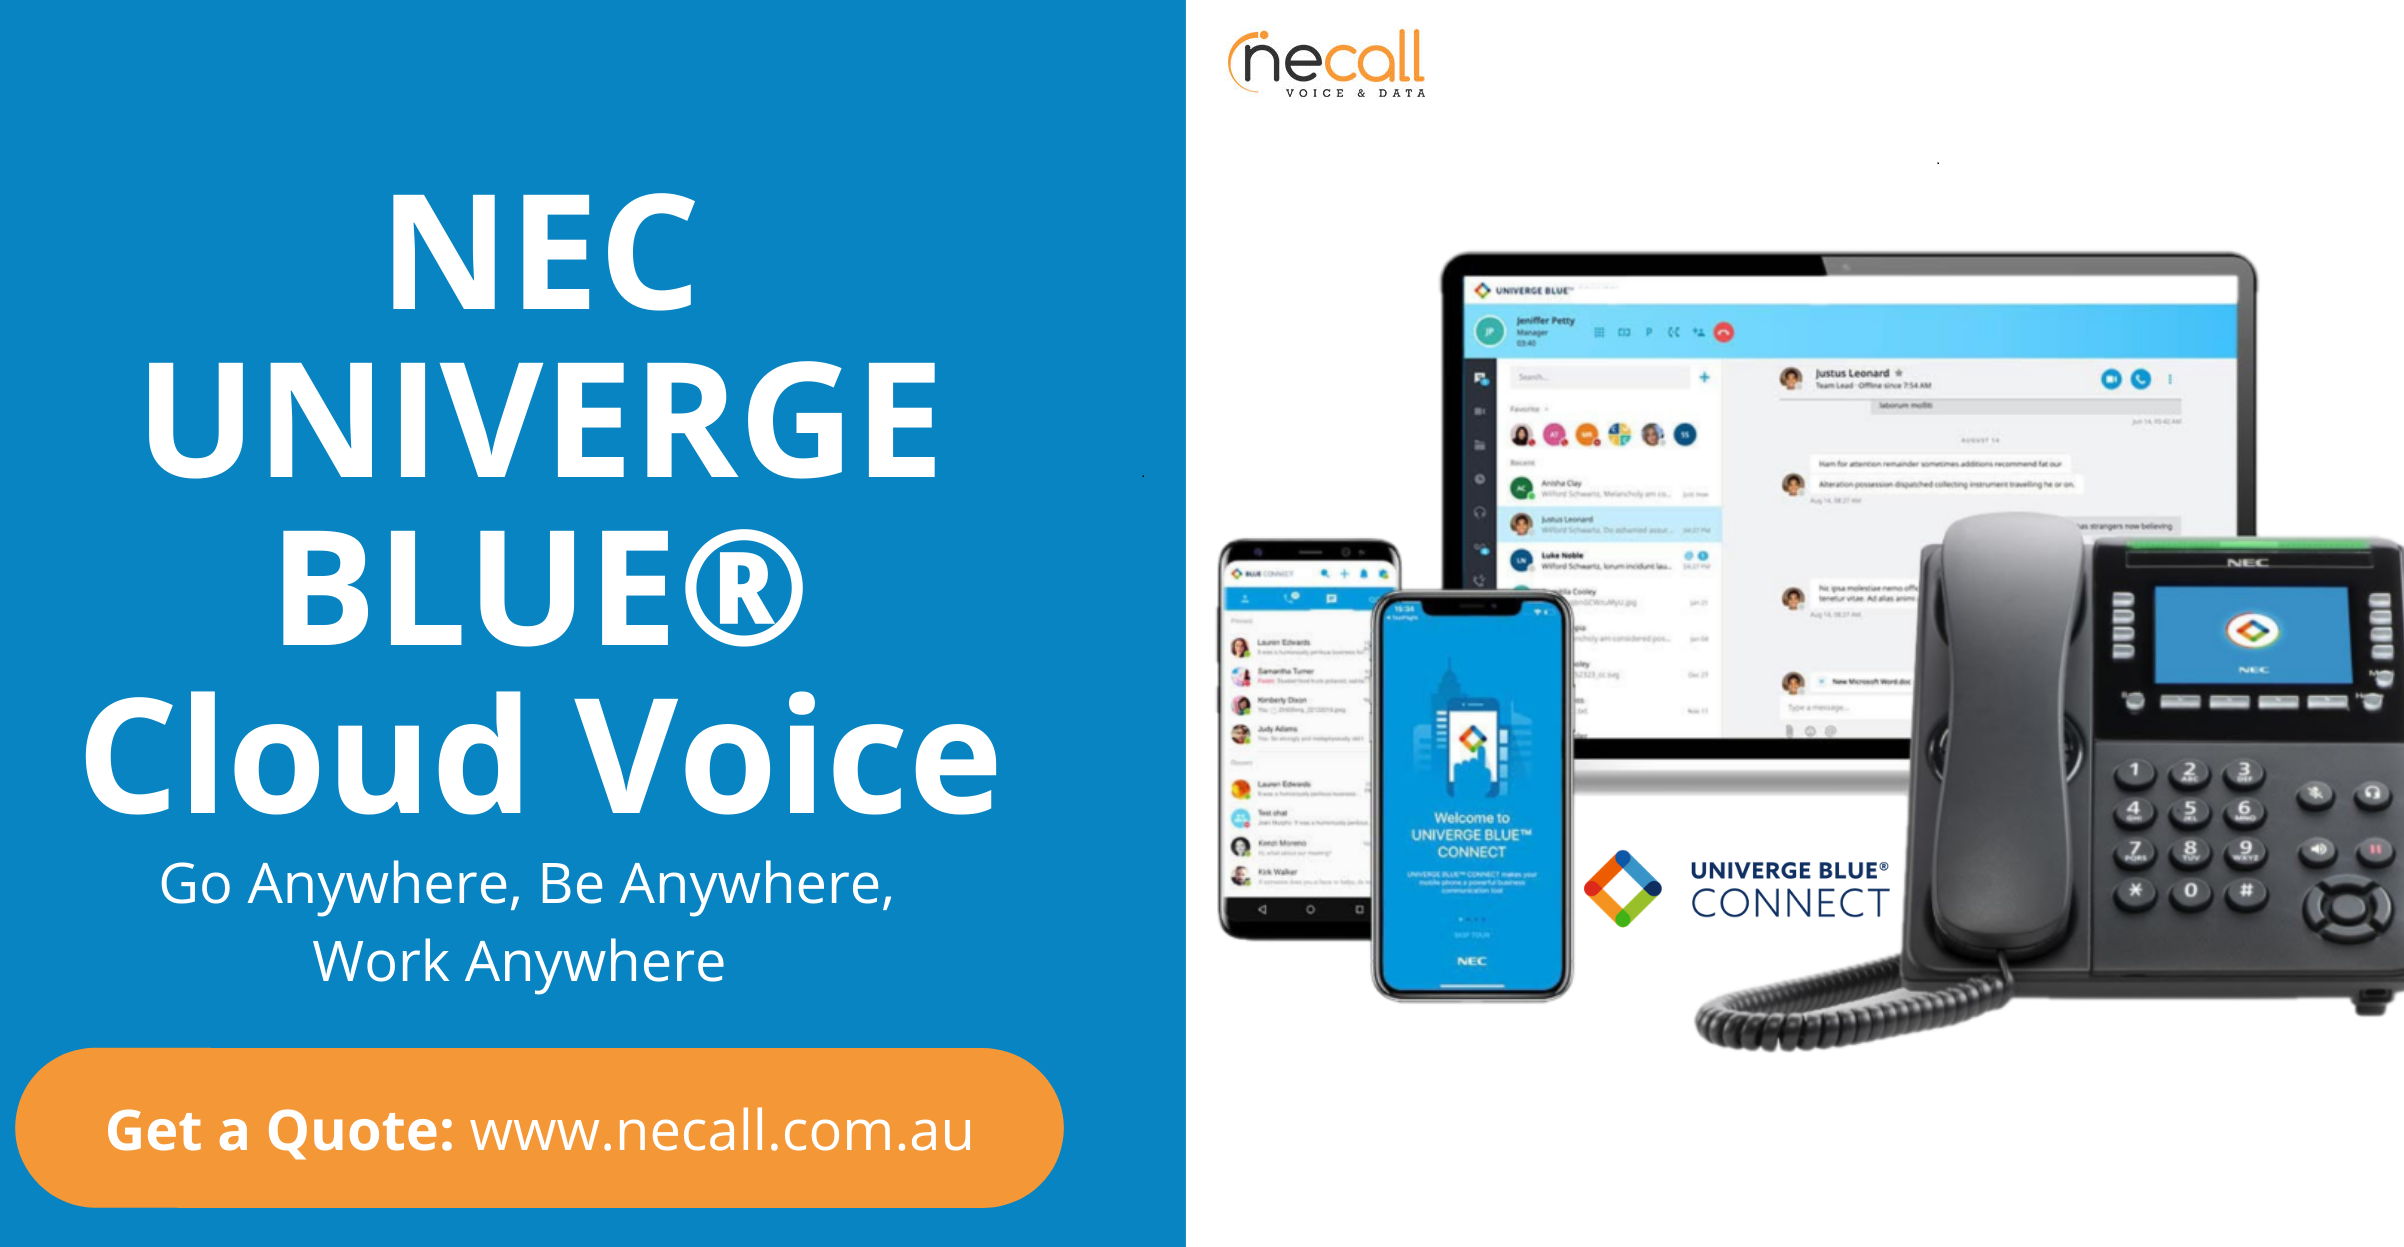 Scale New Heights with NEC Univerge Blue Cloud Voice -